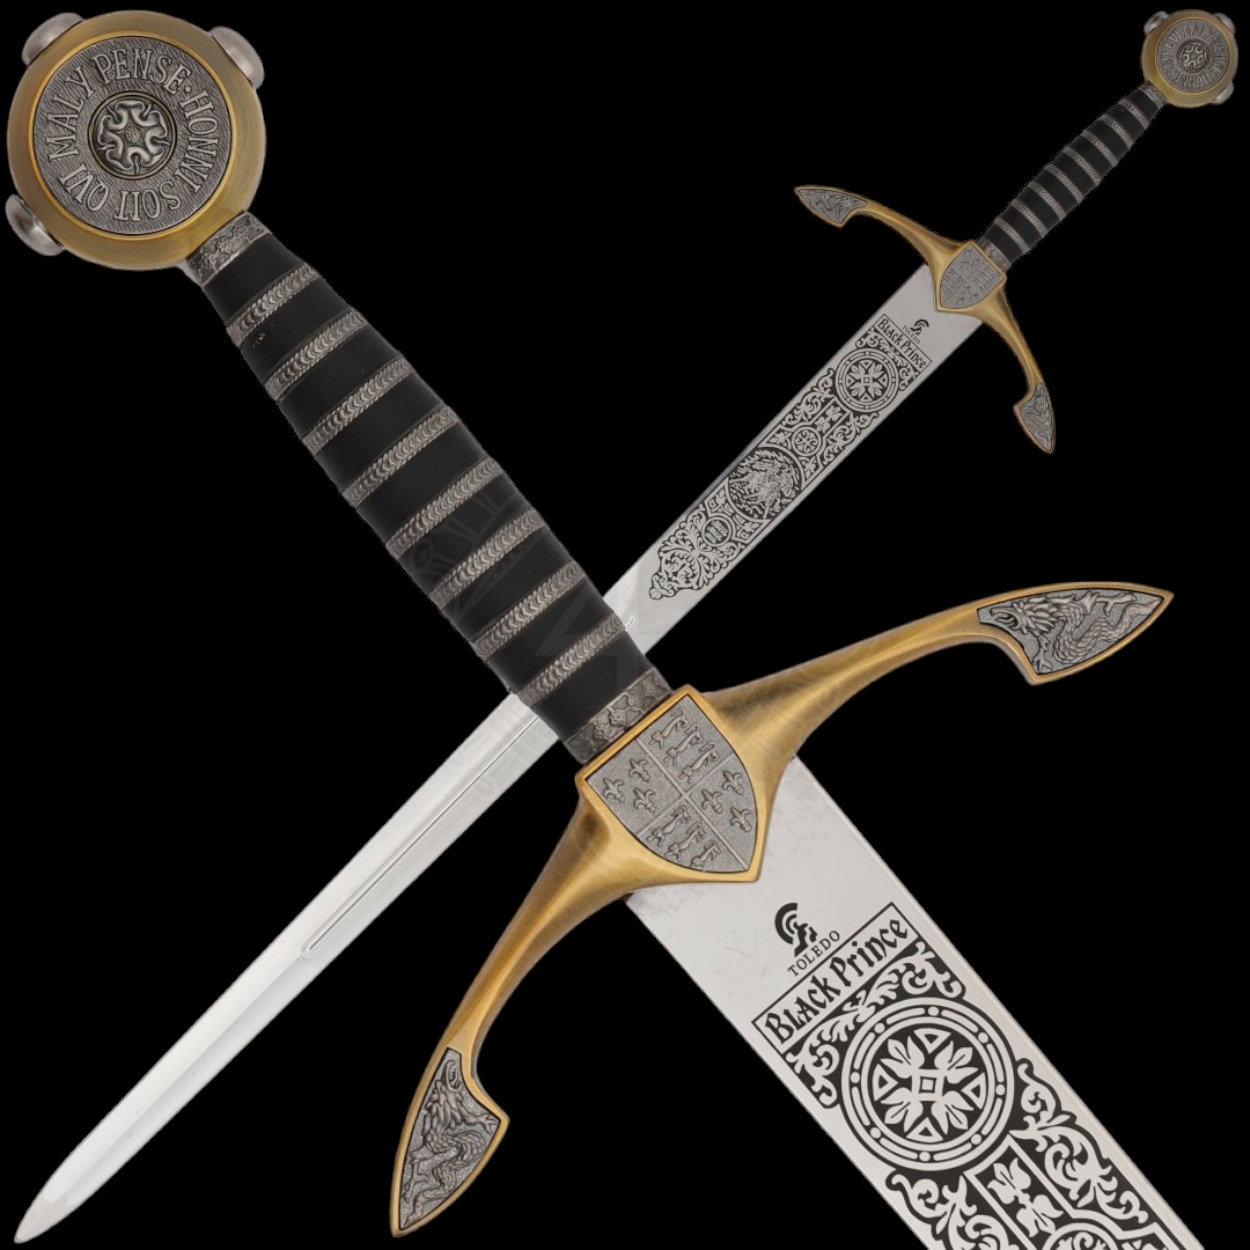 WONDERFULLY DECORATED SWORD OF THE BLACK PRINCE (249)